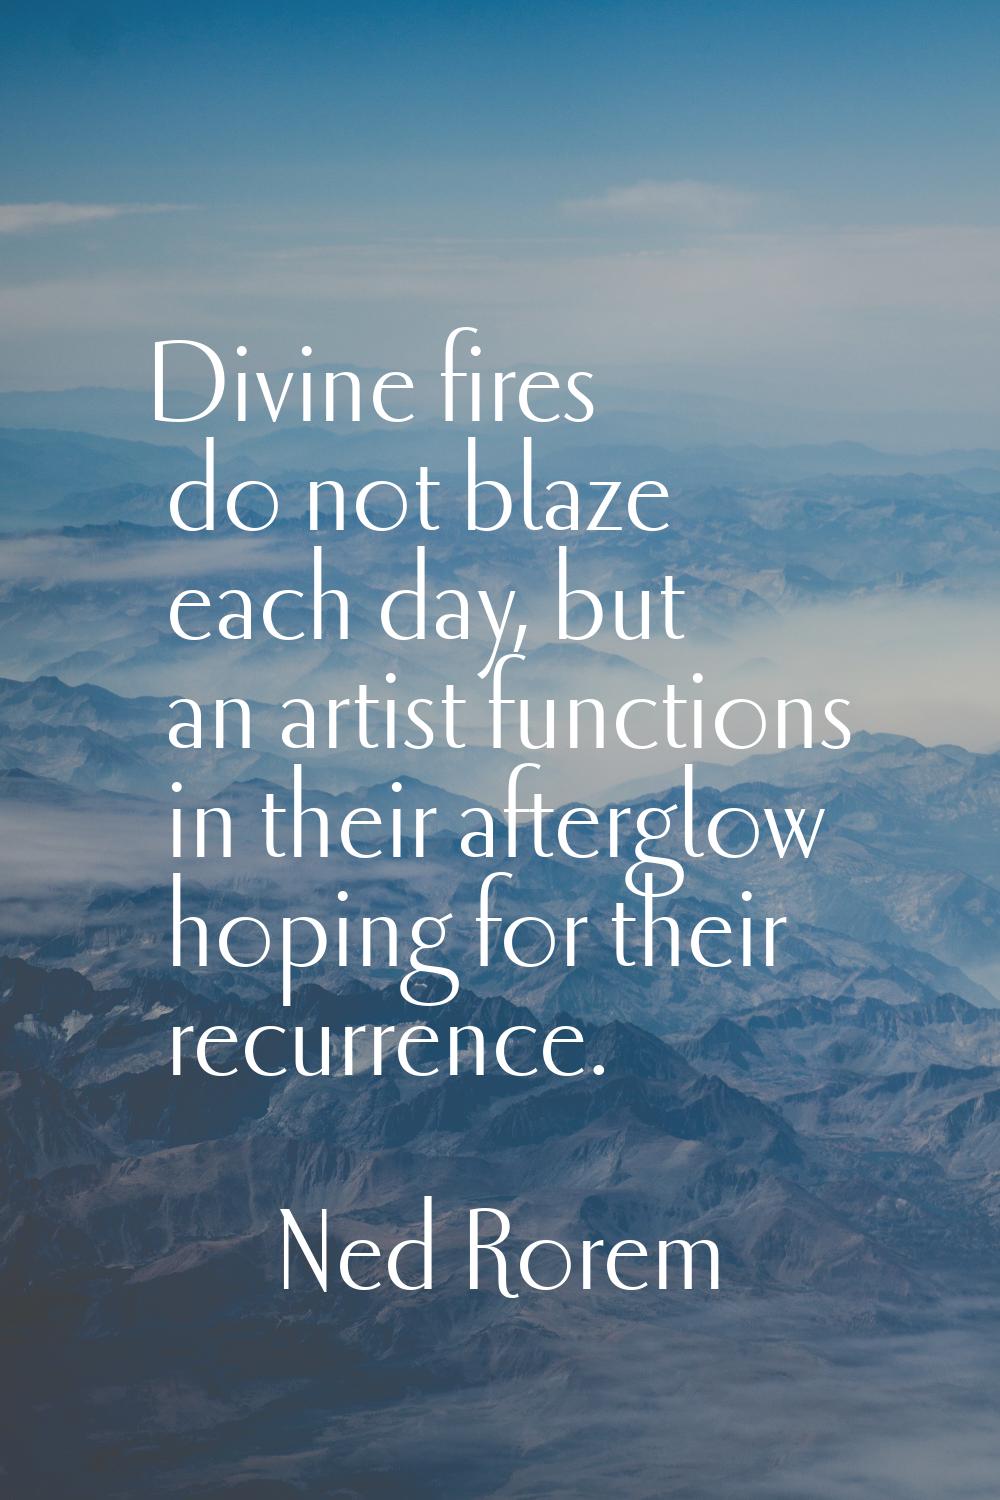 Divine fires do not blaze each day, but an artist functions in their afterglow hoping for their rec